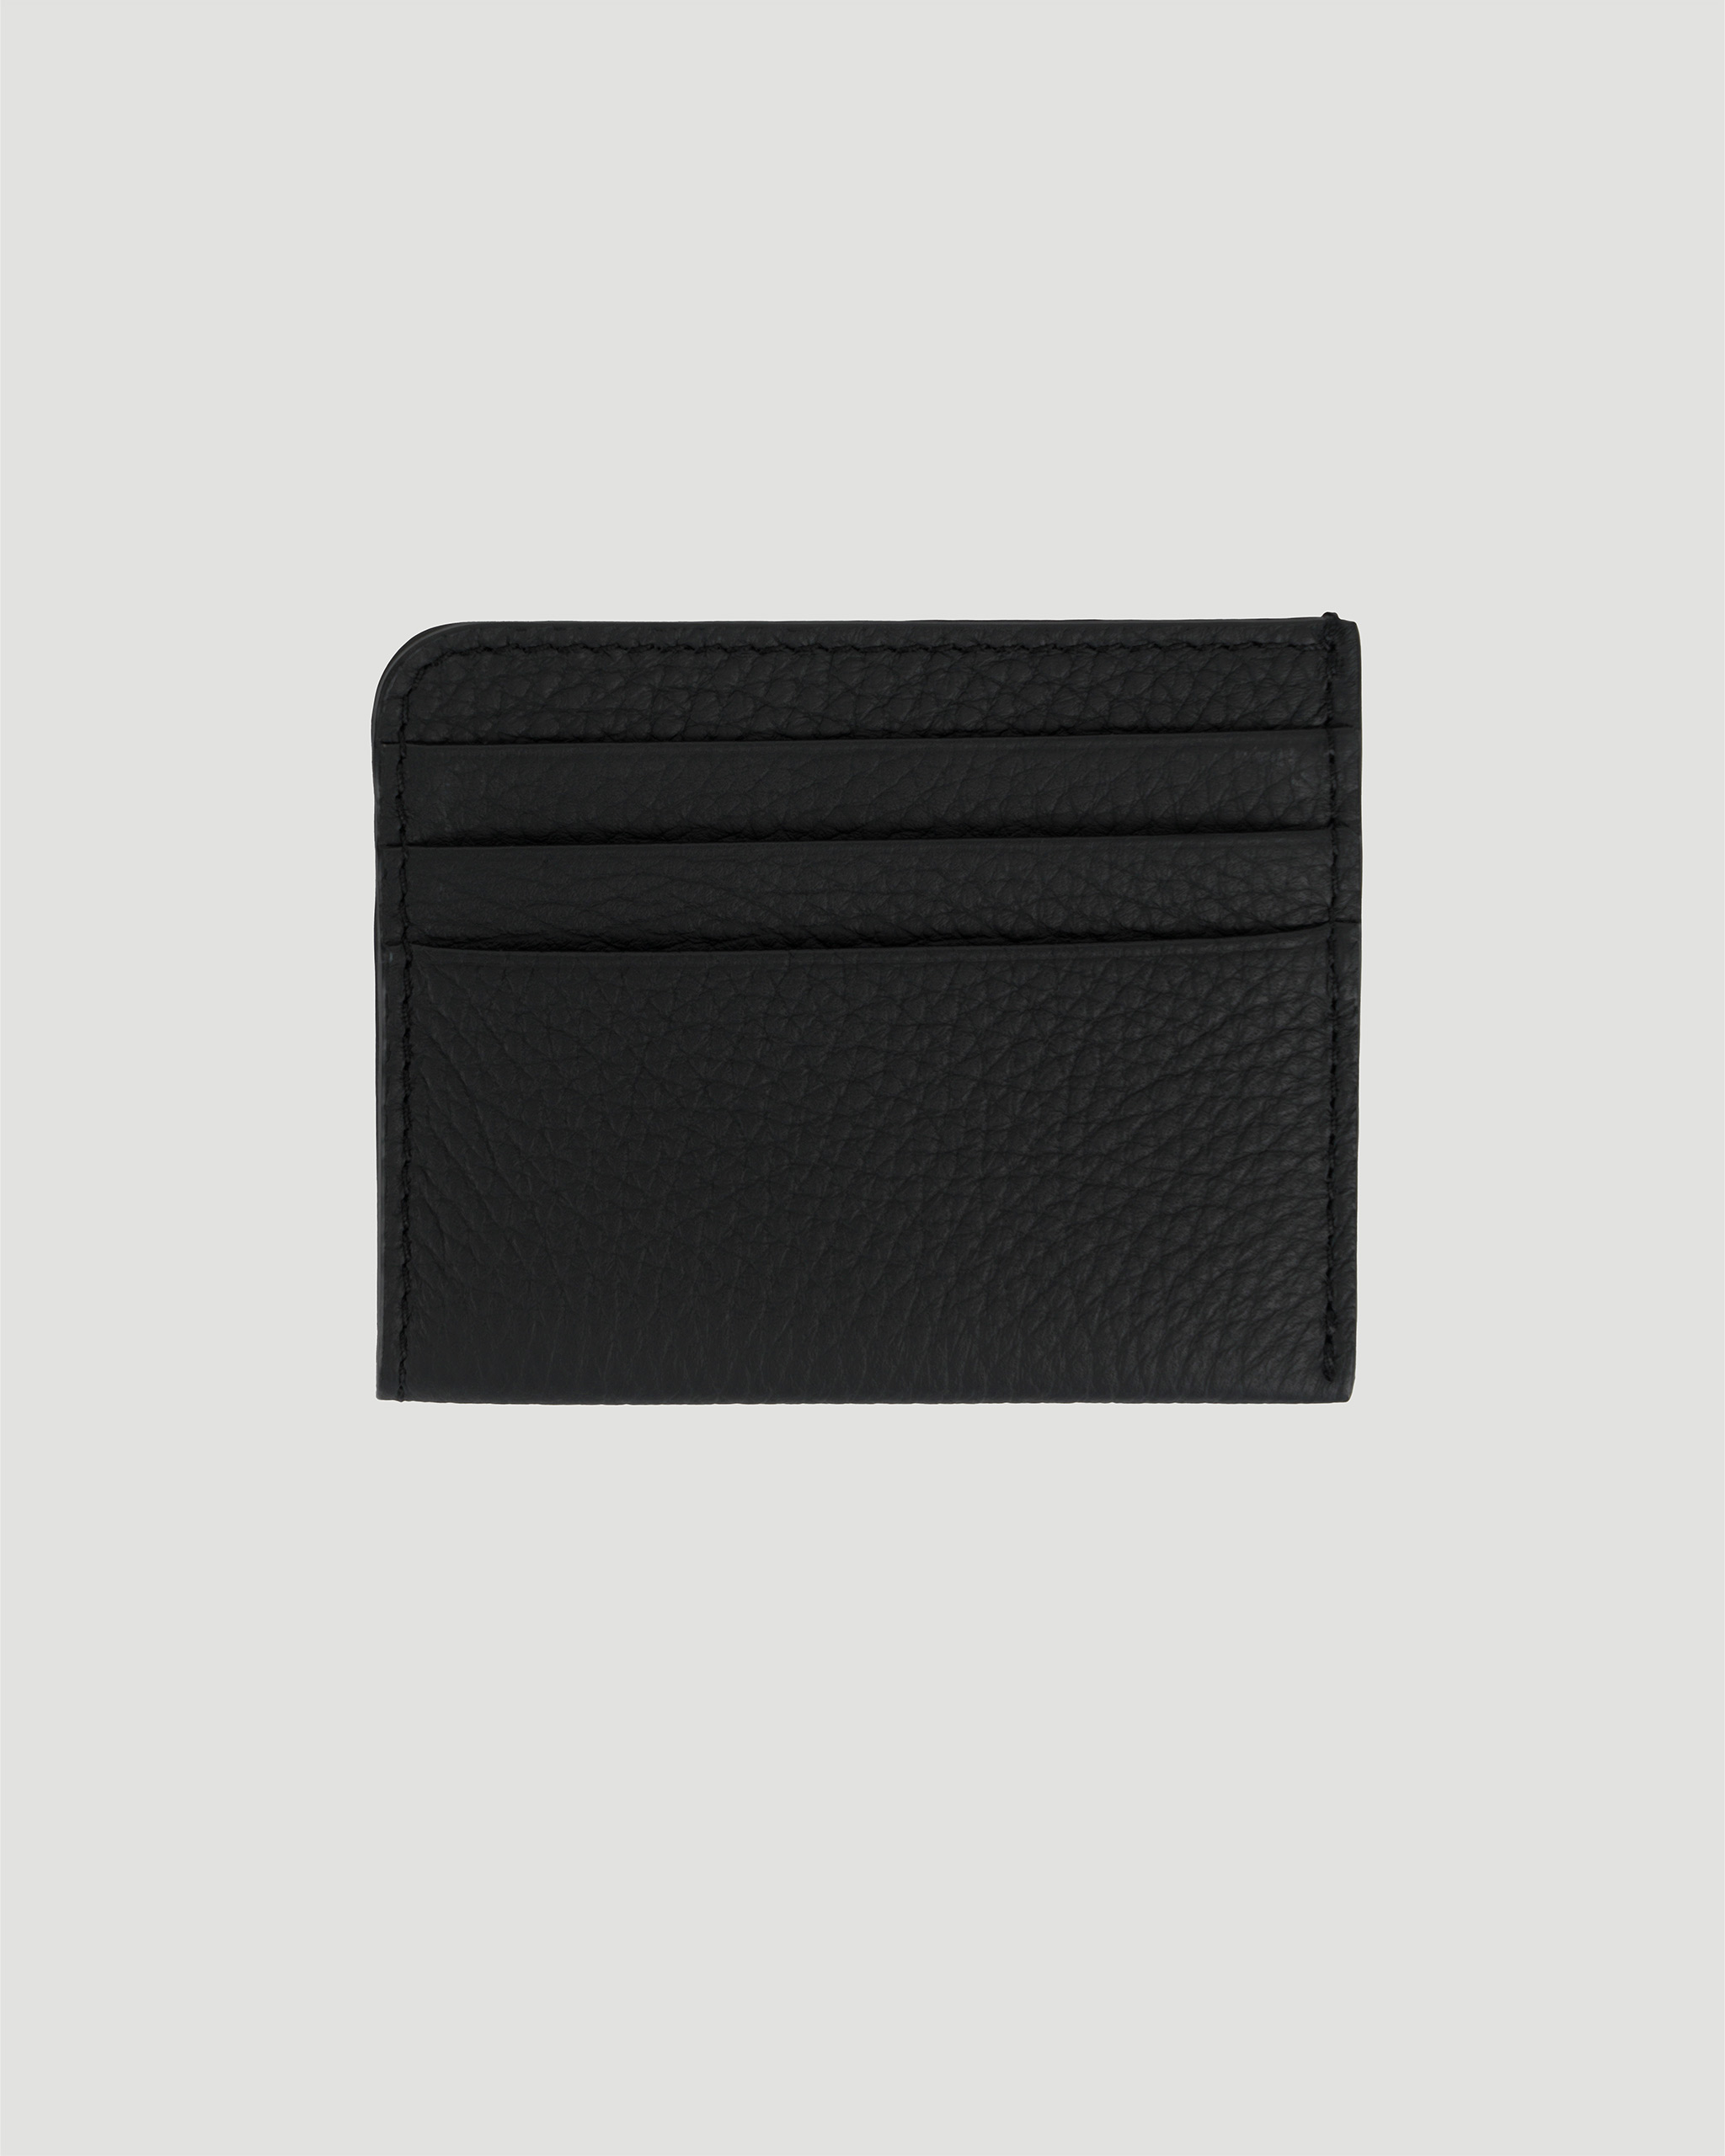 LEATHER CARD HOLDER IN BLACK - All-U-Re